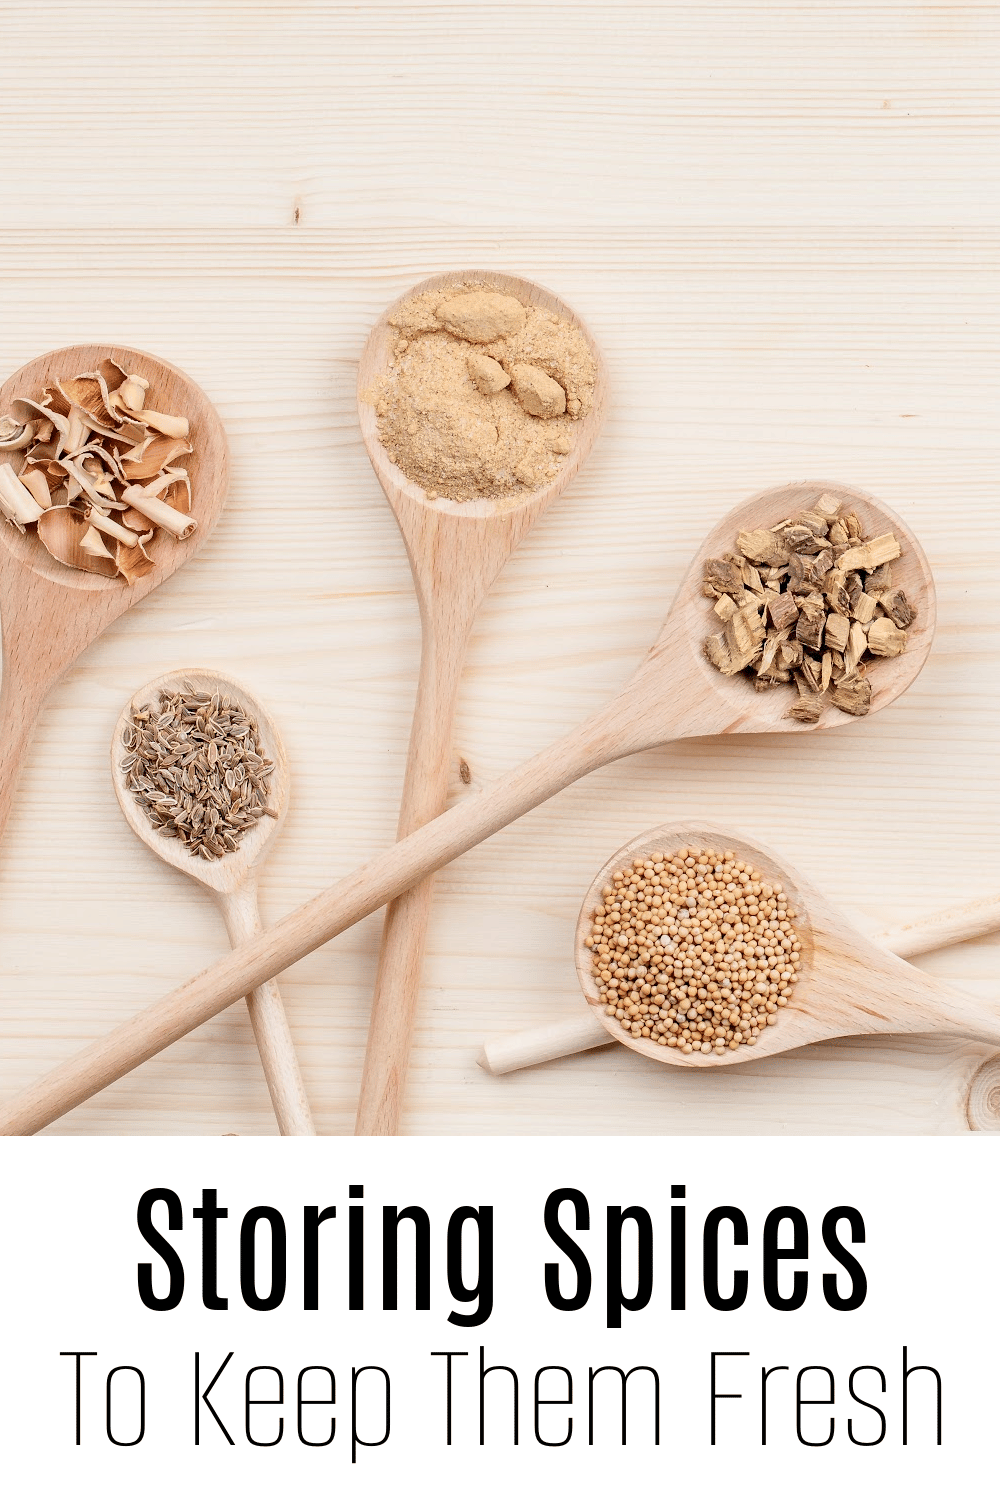 https://www.inspiringsavings.com/wp-content/uploads/2022/11/Storing-Spices-to-keep-them-fresh.png